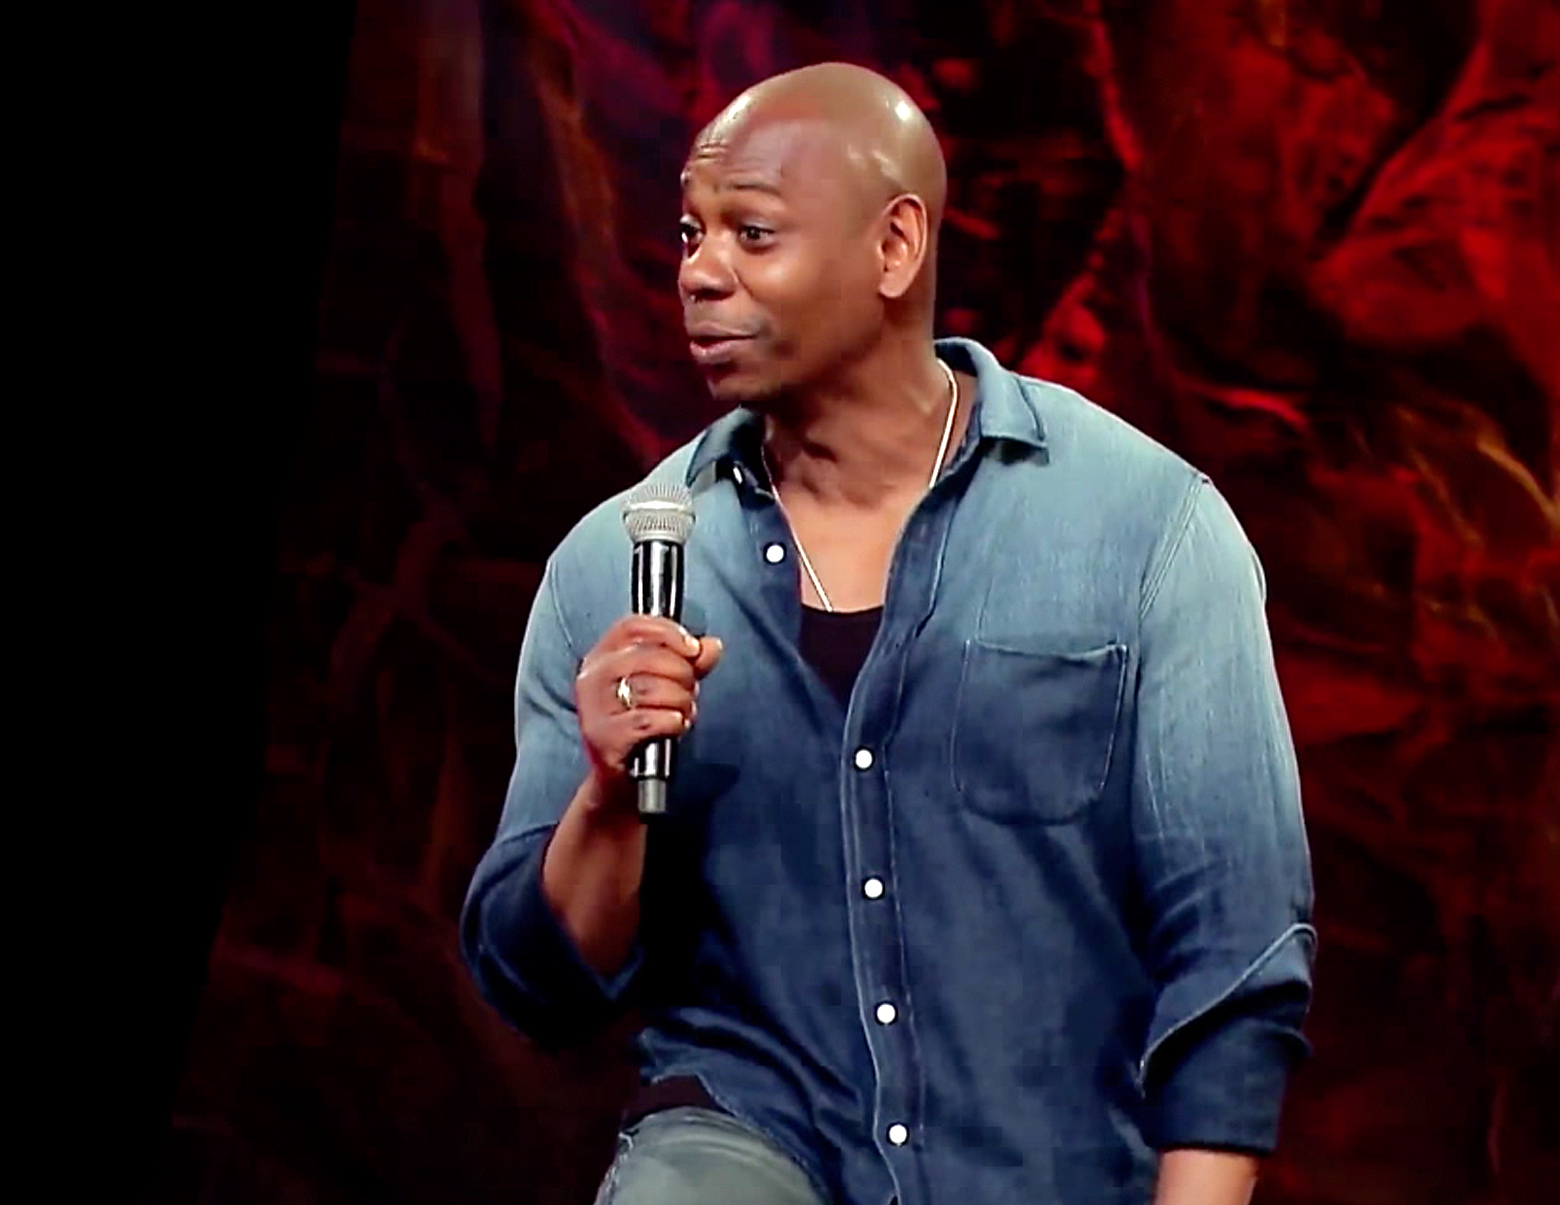 Here's your very first look at Dave Chappelle's new standup specials